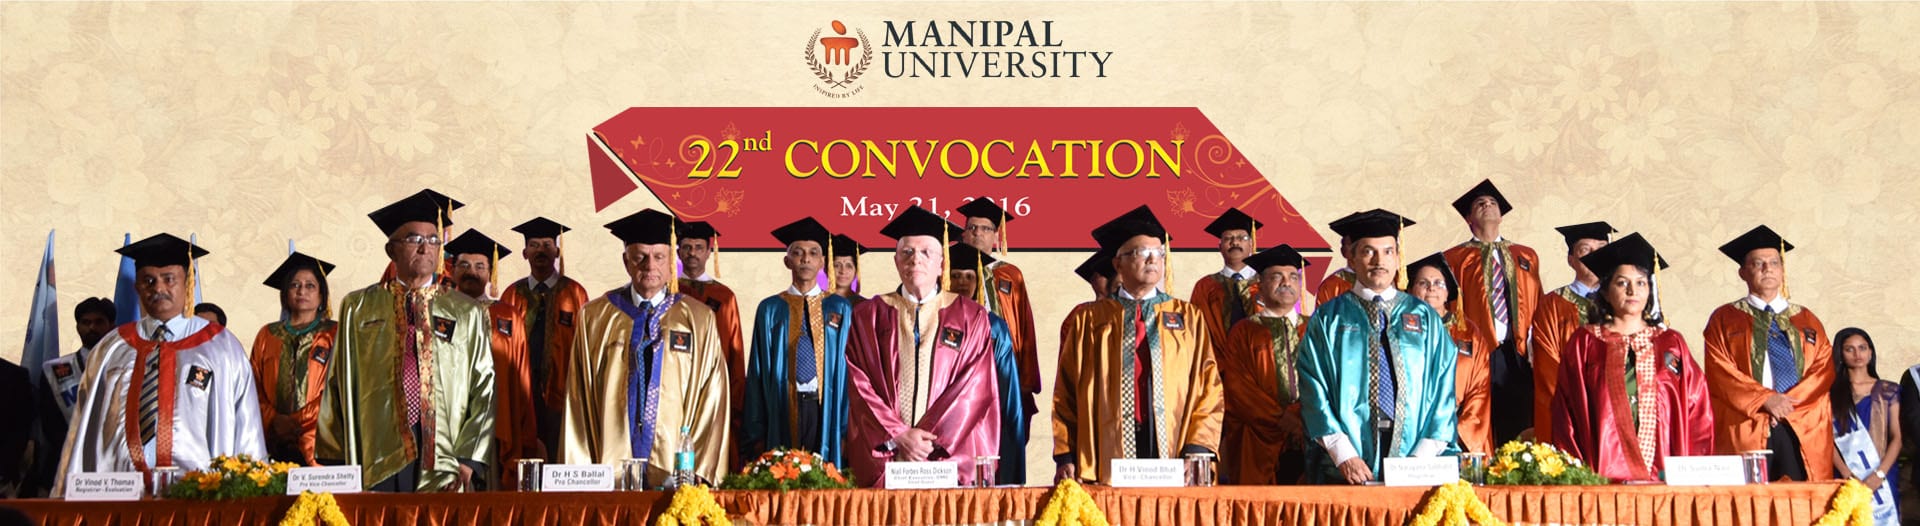 Manipal University honored as the No. 1 Indian Private University in QS World University Rankings 2018